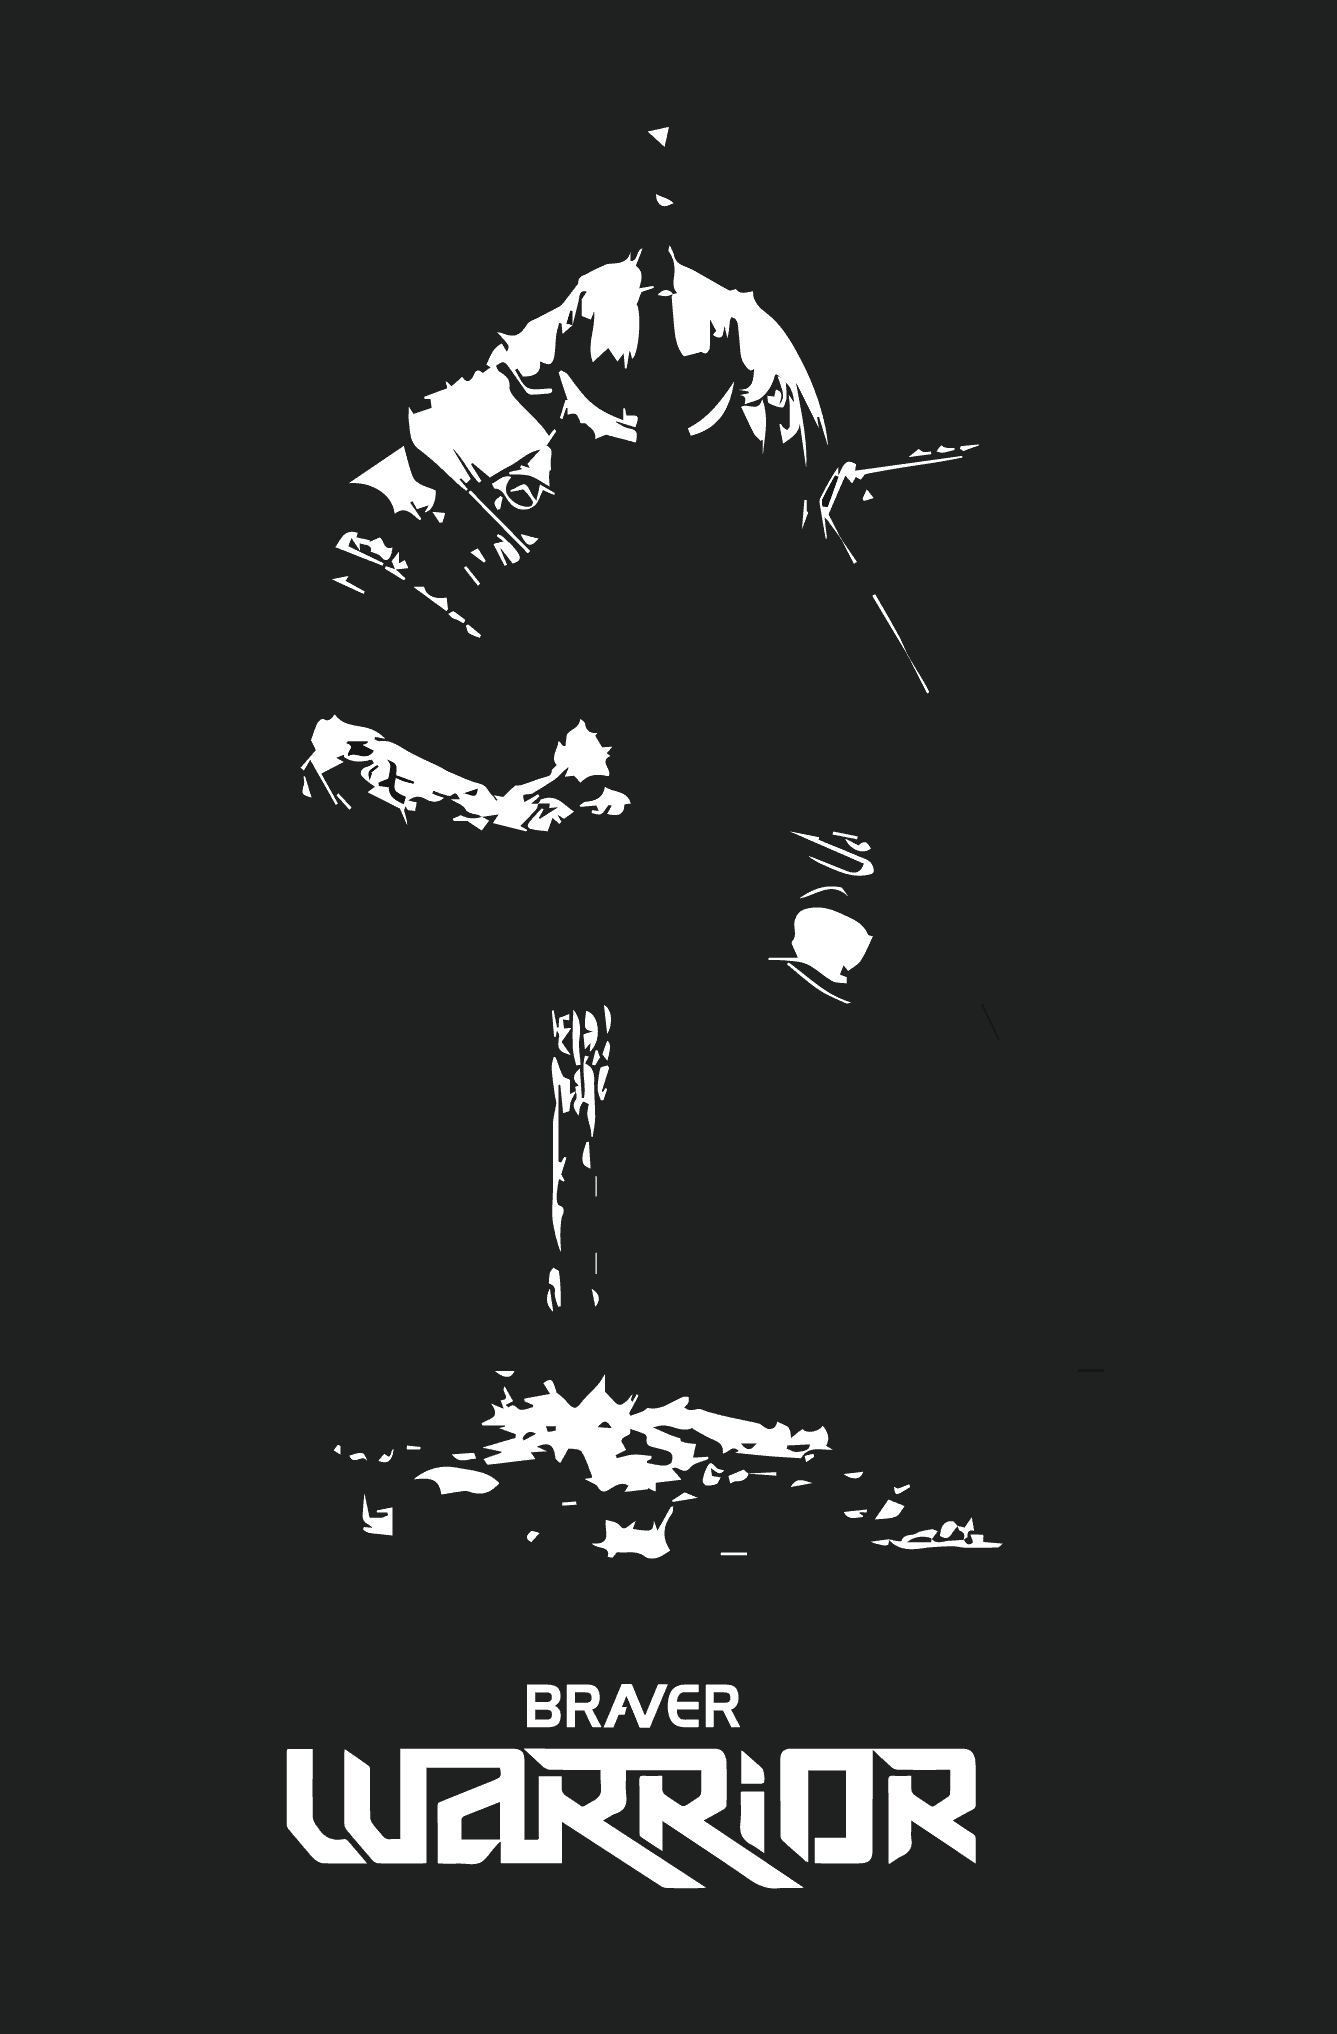 Silhouette of a Warrior figure in white on a black background